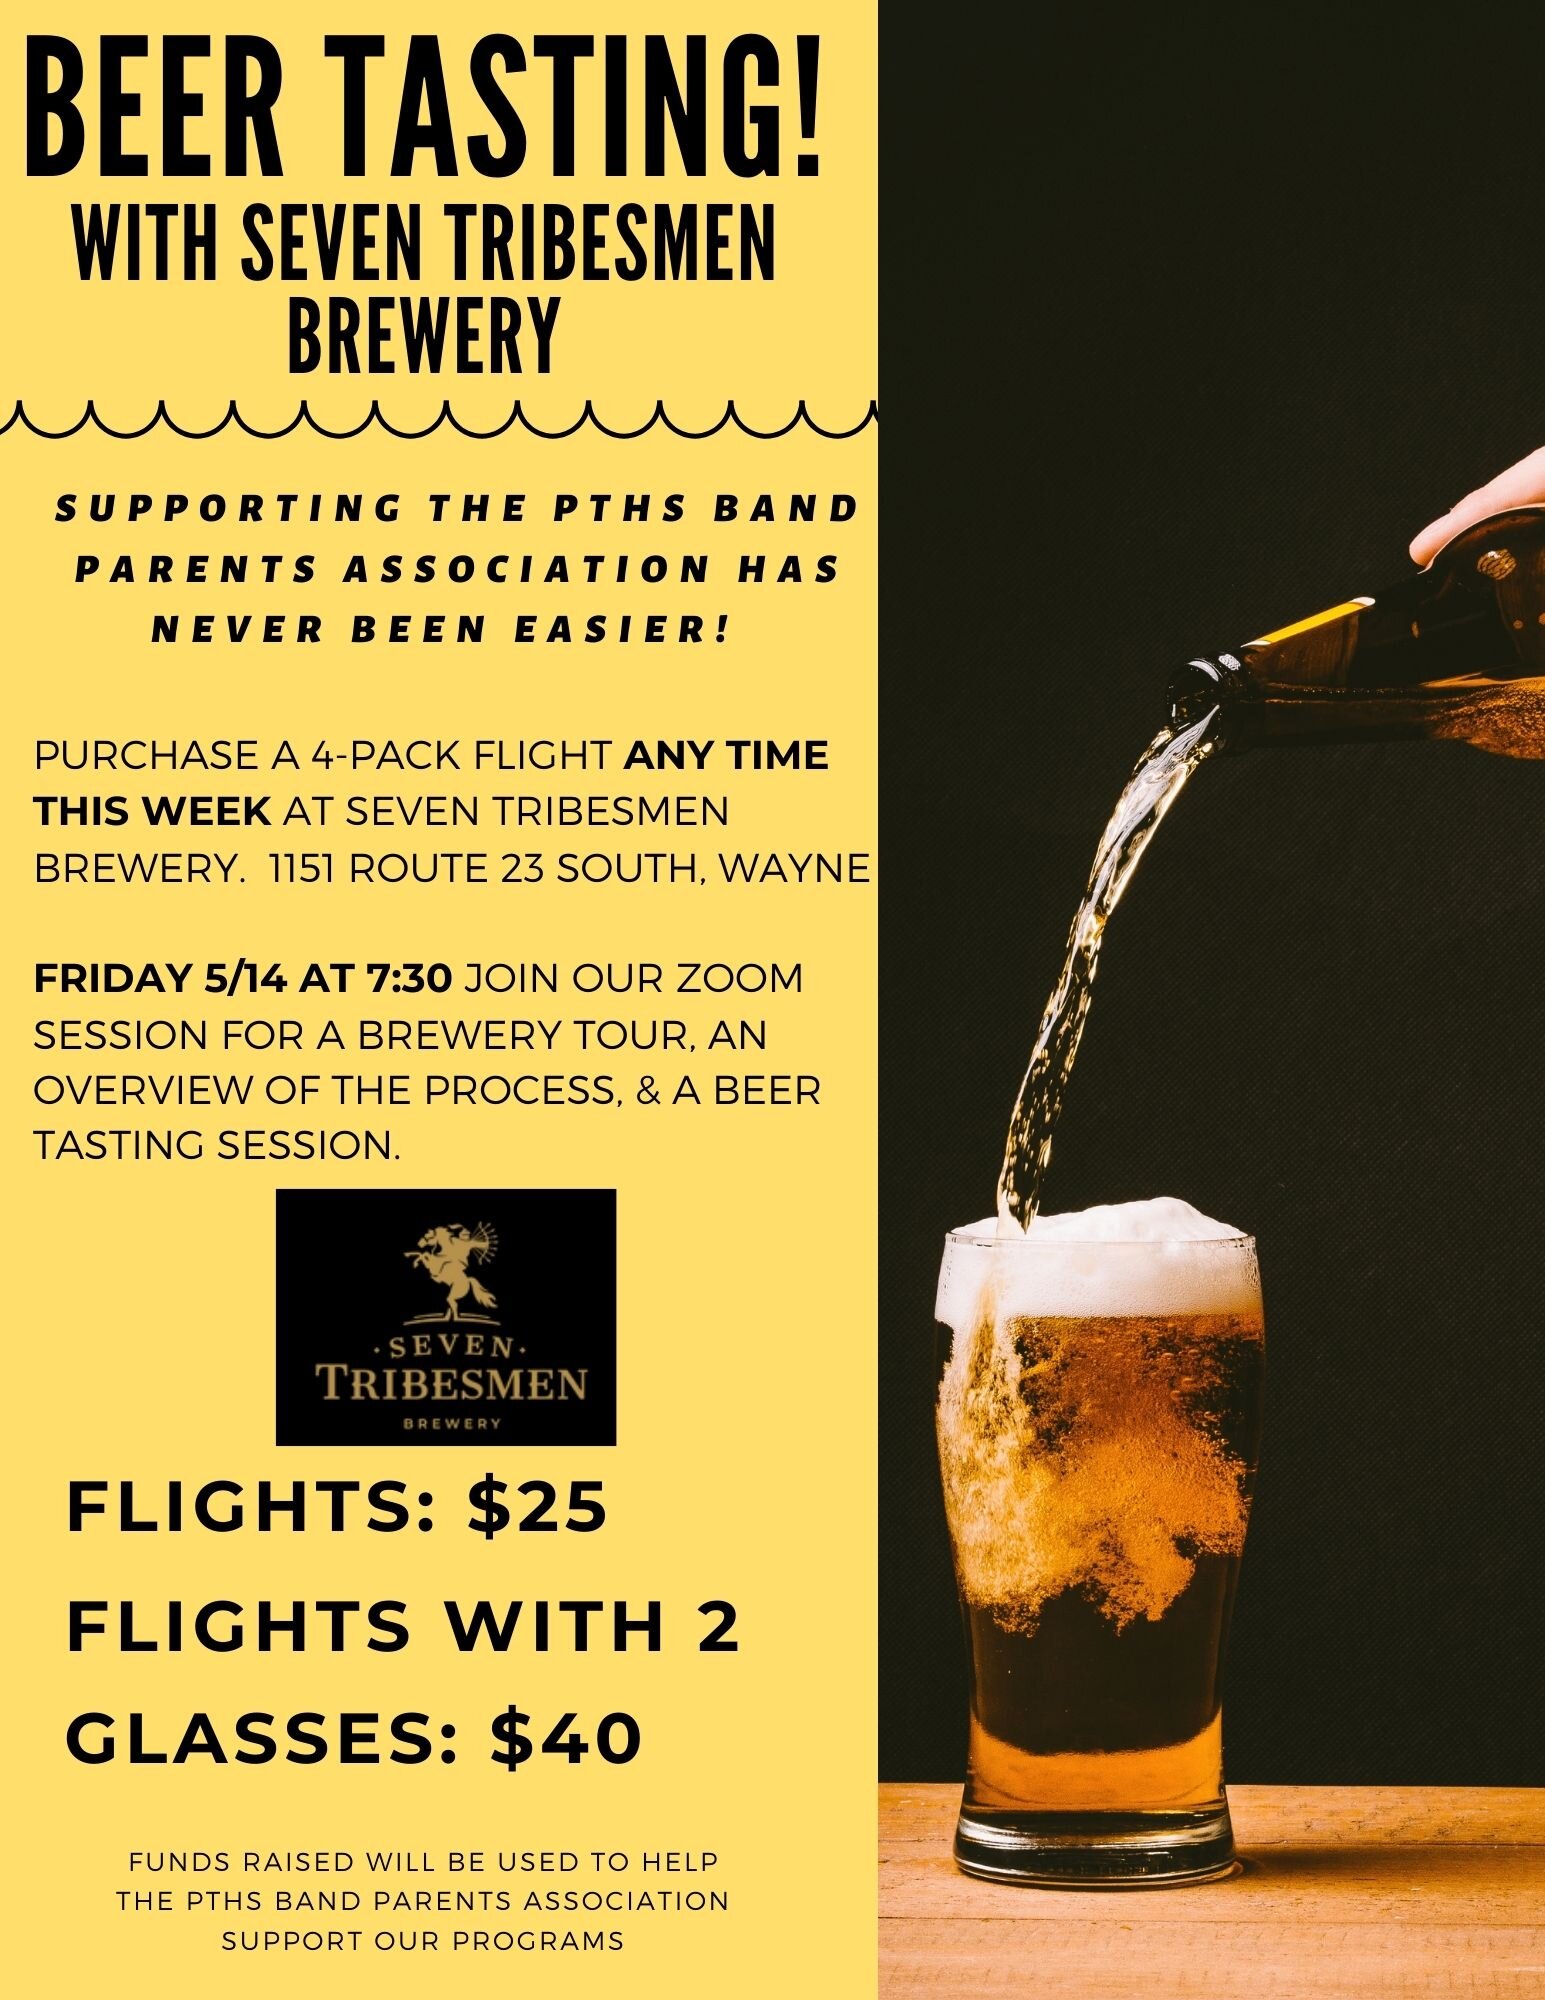 Beer Tasting Fundraiser With Seven Tribesmen Brewery In Wayne Pths Band Parents Association